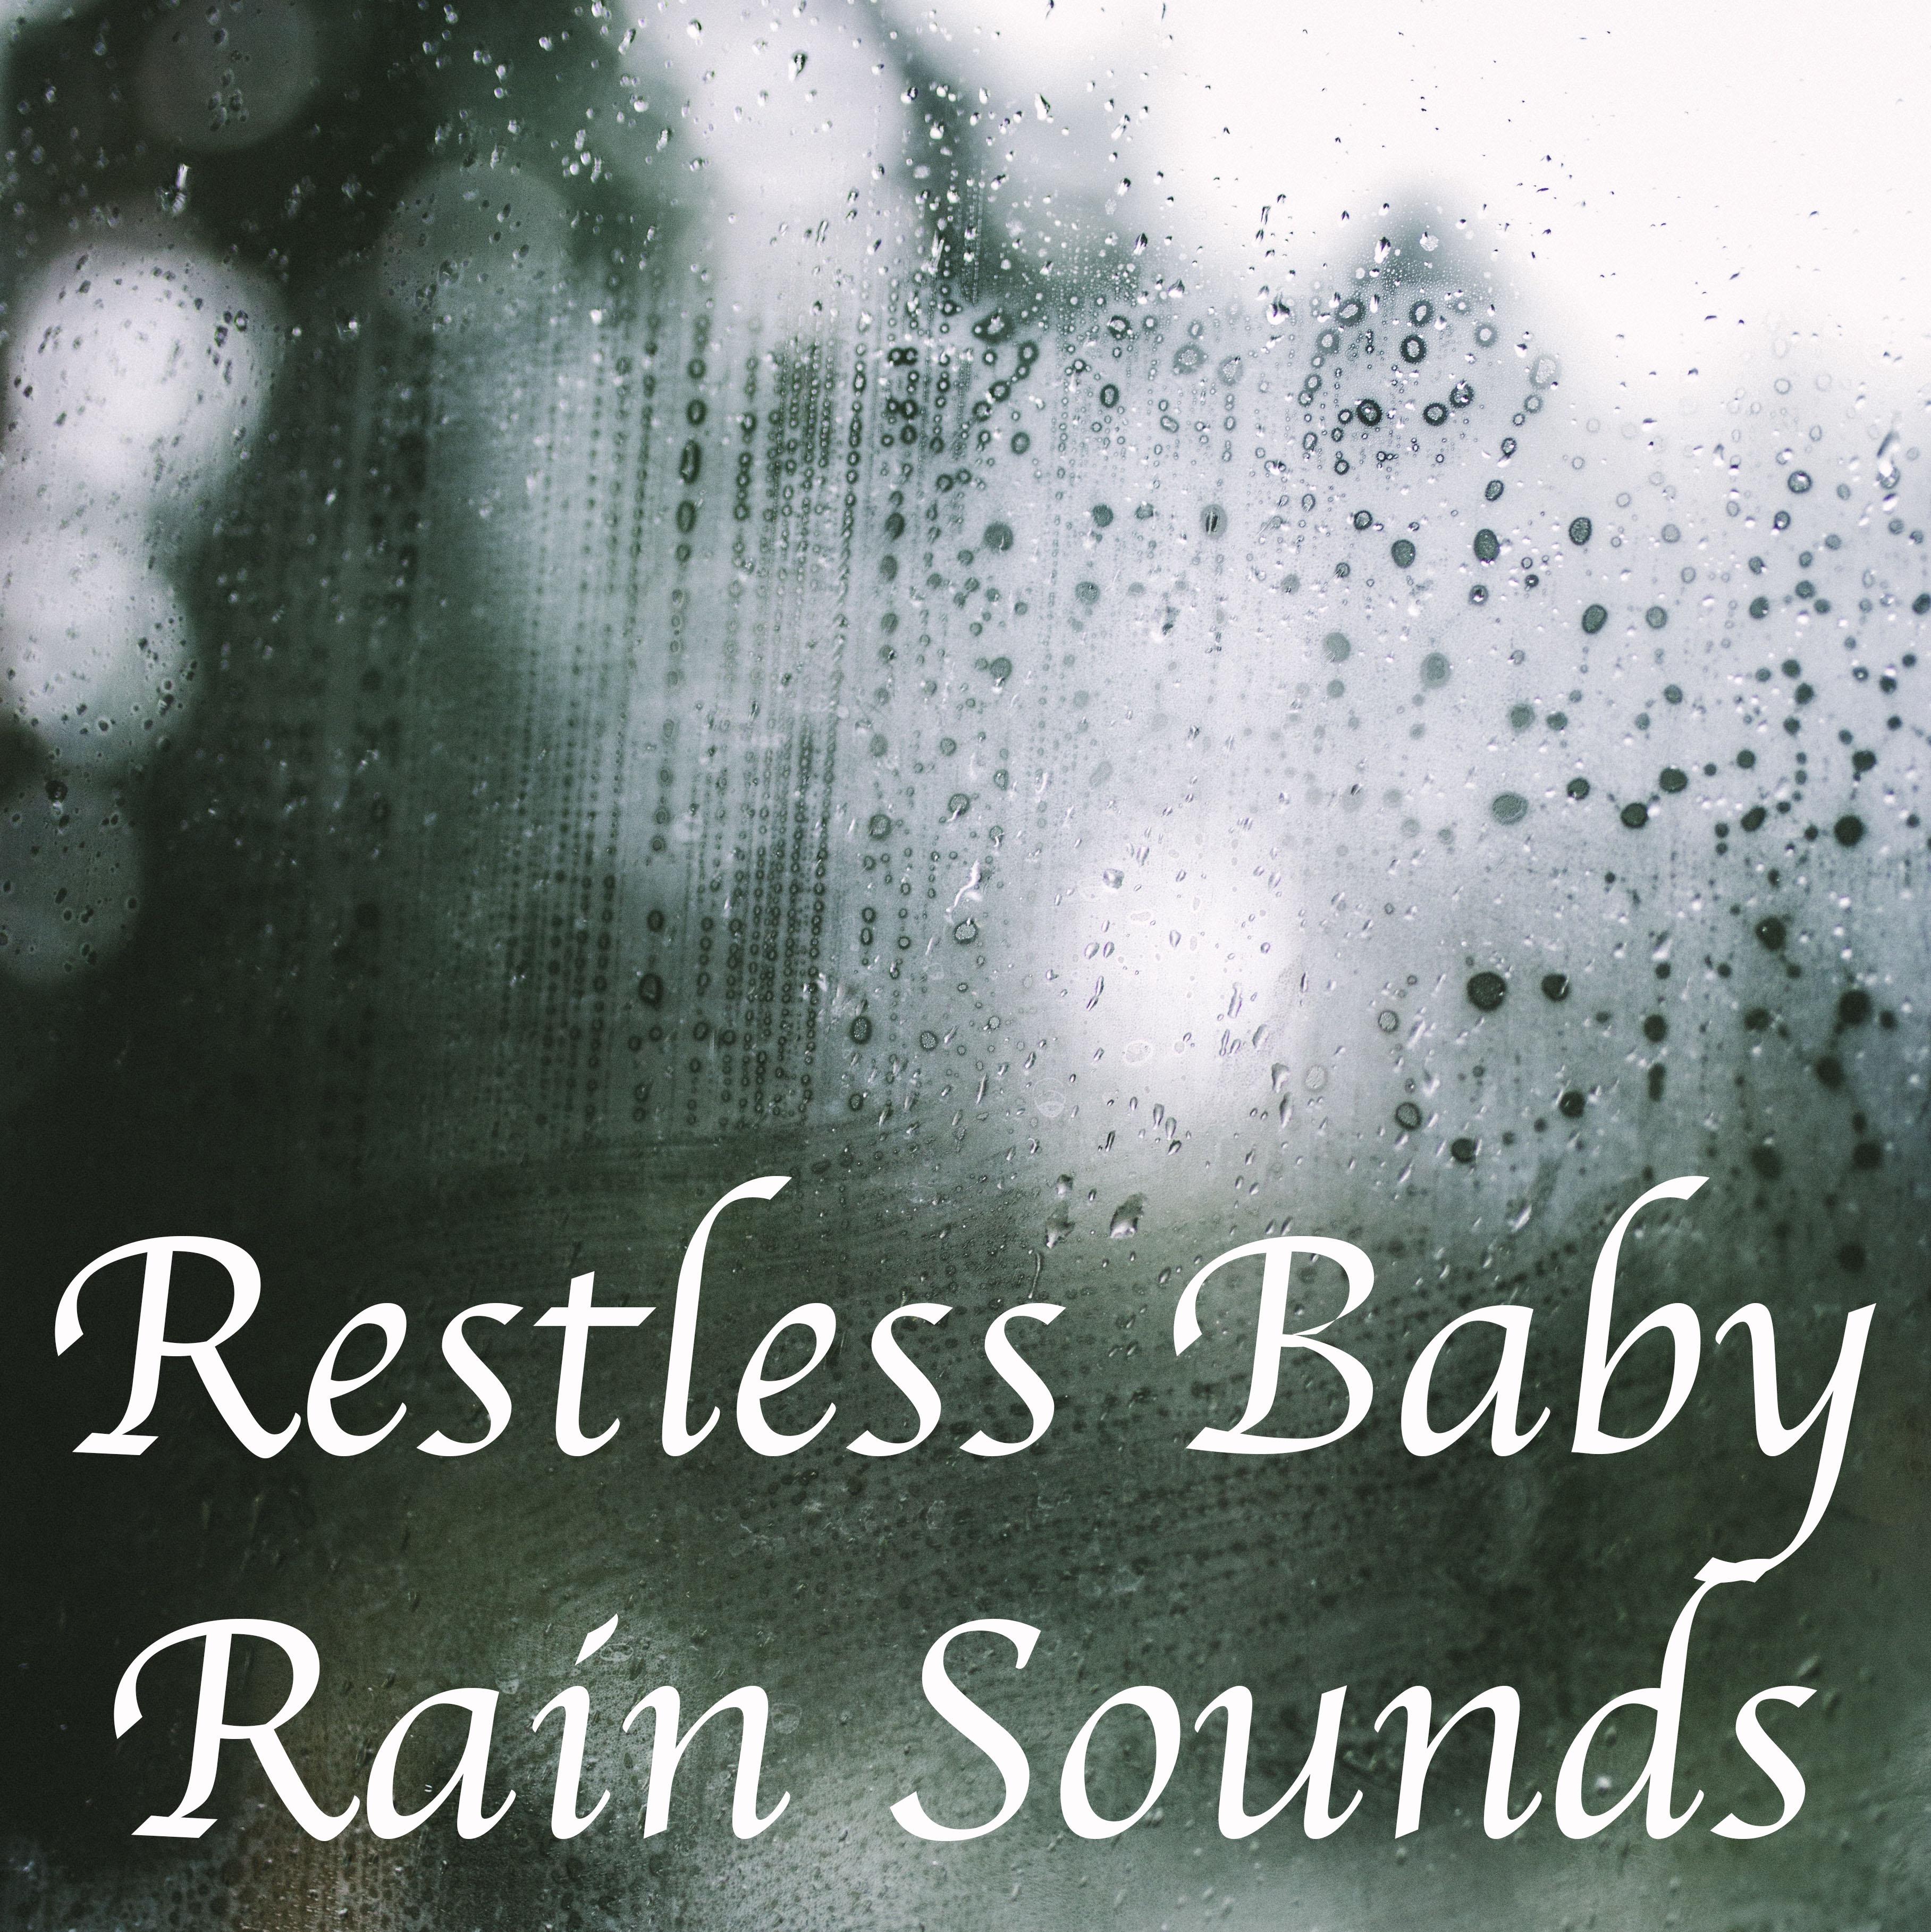 14 Restless Baby Rain Sounds - Calming and Natural